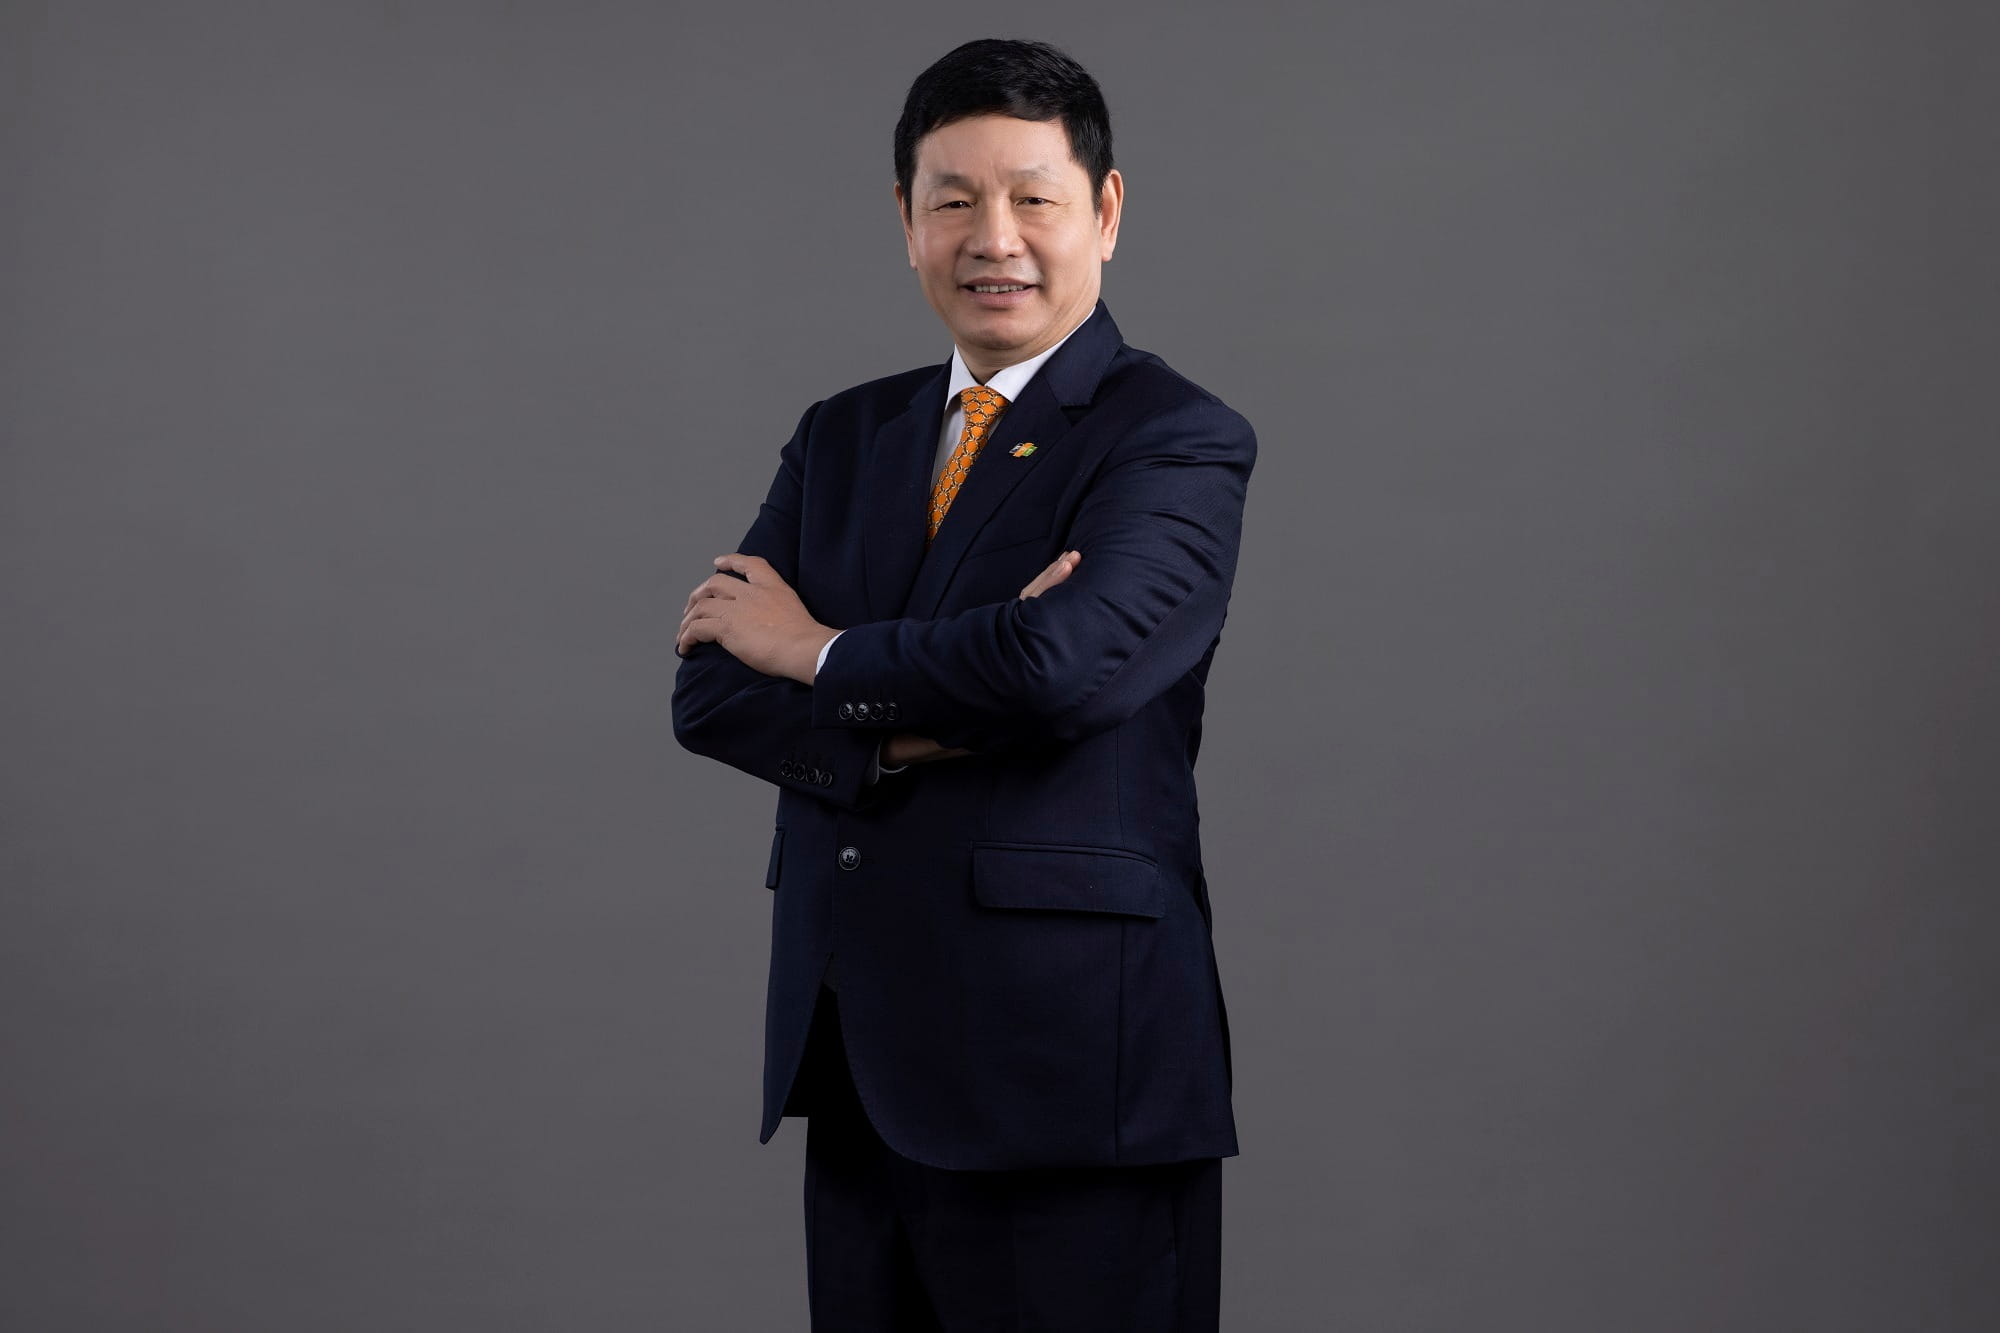 FPT Chairman Truong Gia Binh is one of three co-chairmen of the Council, along with VCCI Chairman Pham Tan Cong and THACO Group Chairman Tran Ba Duong.